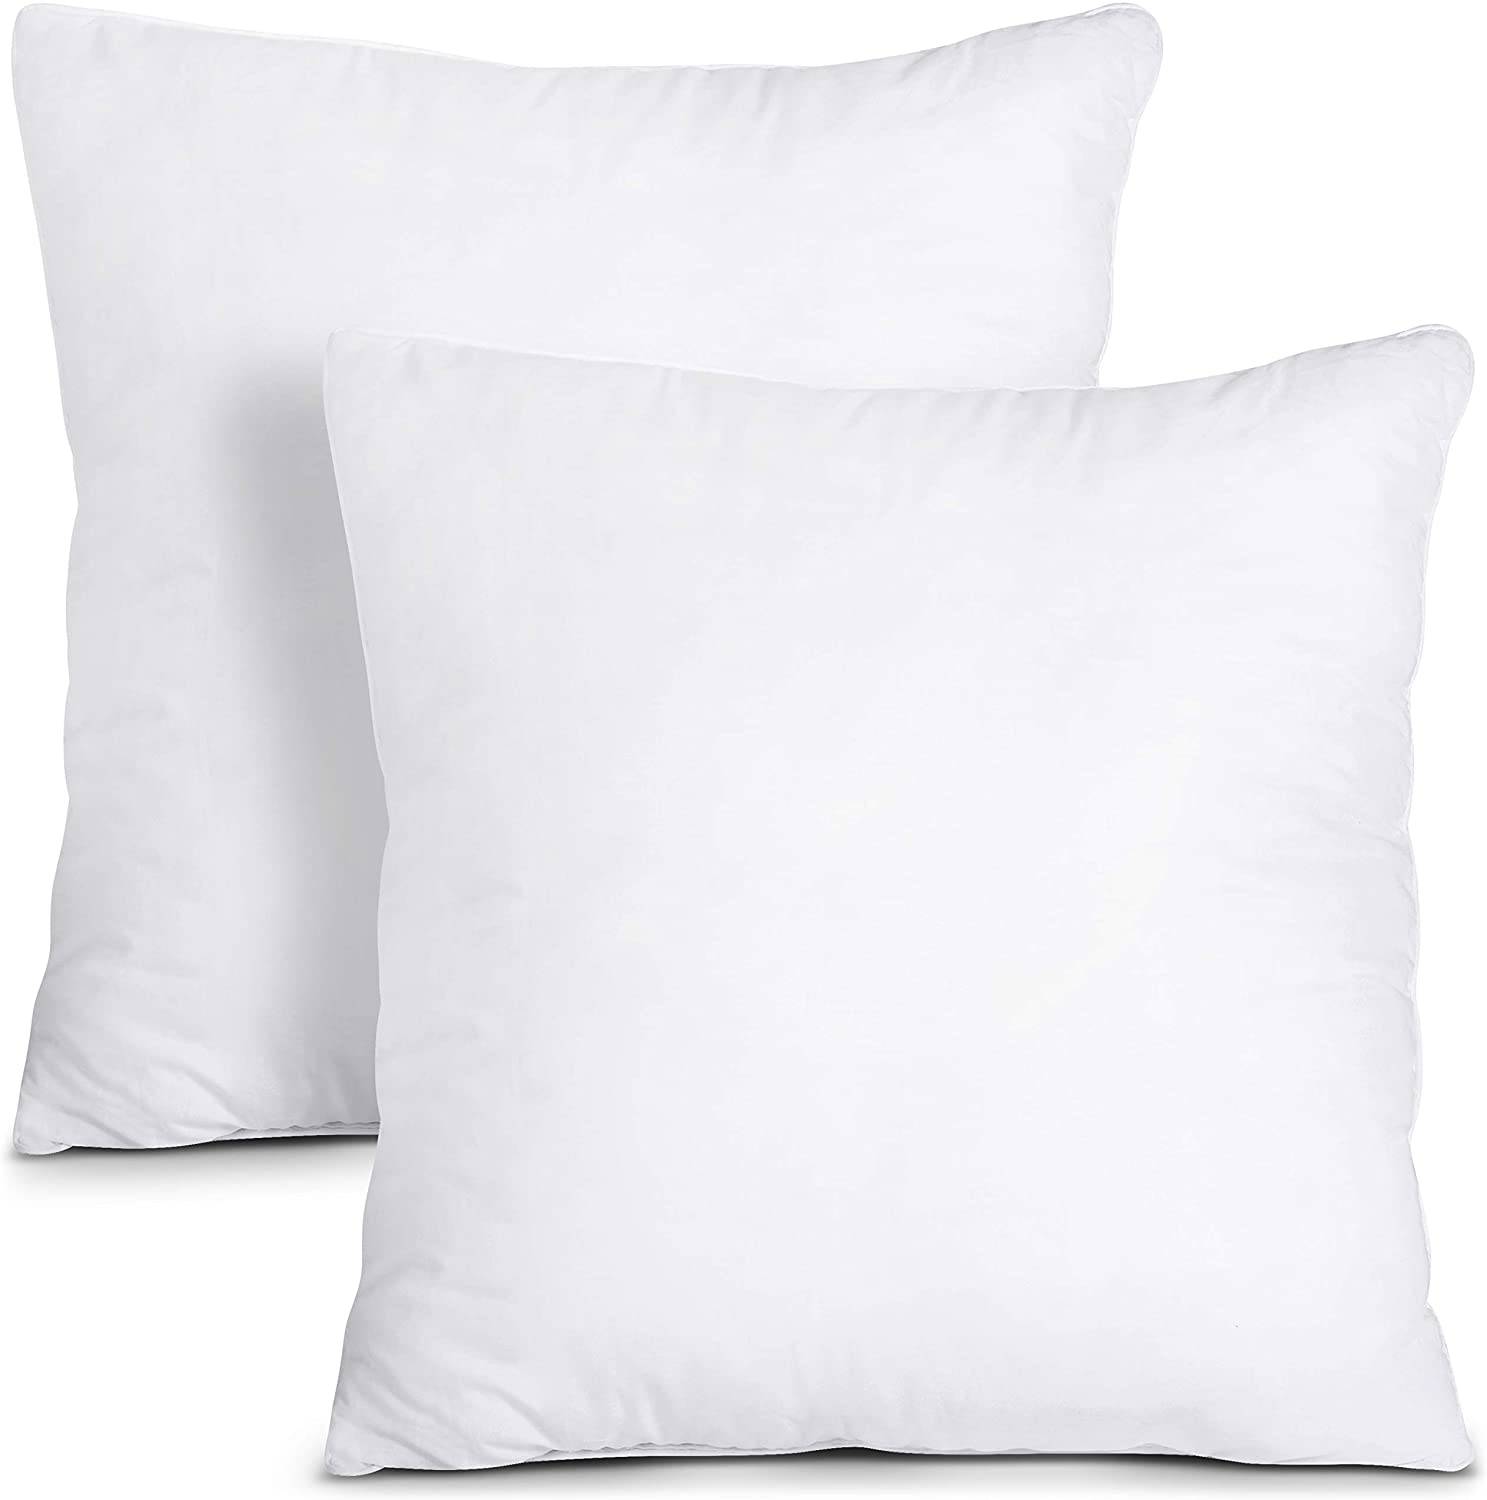 Utopia Bedding Cotton Blend Throw Pillow Inserts, 2-Pack